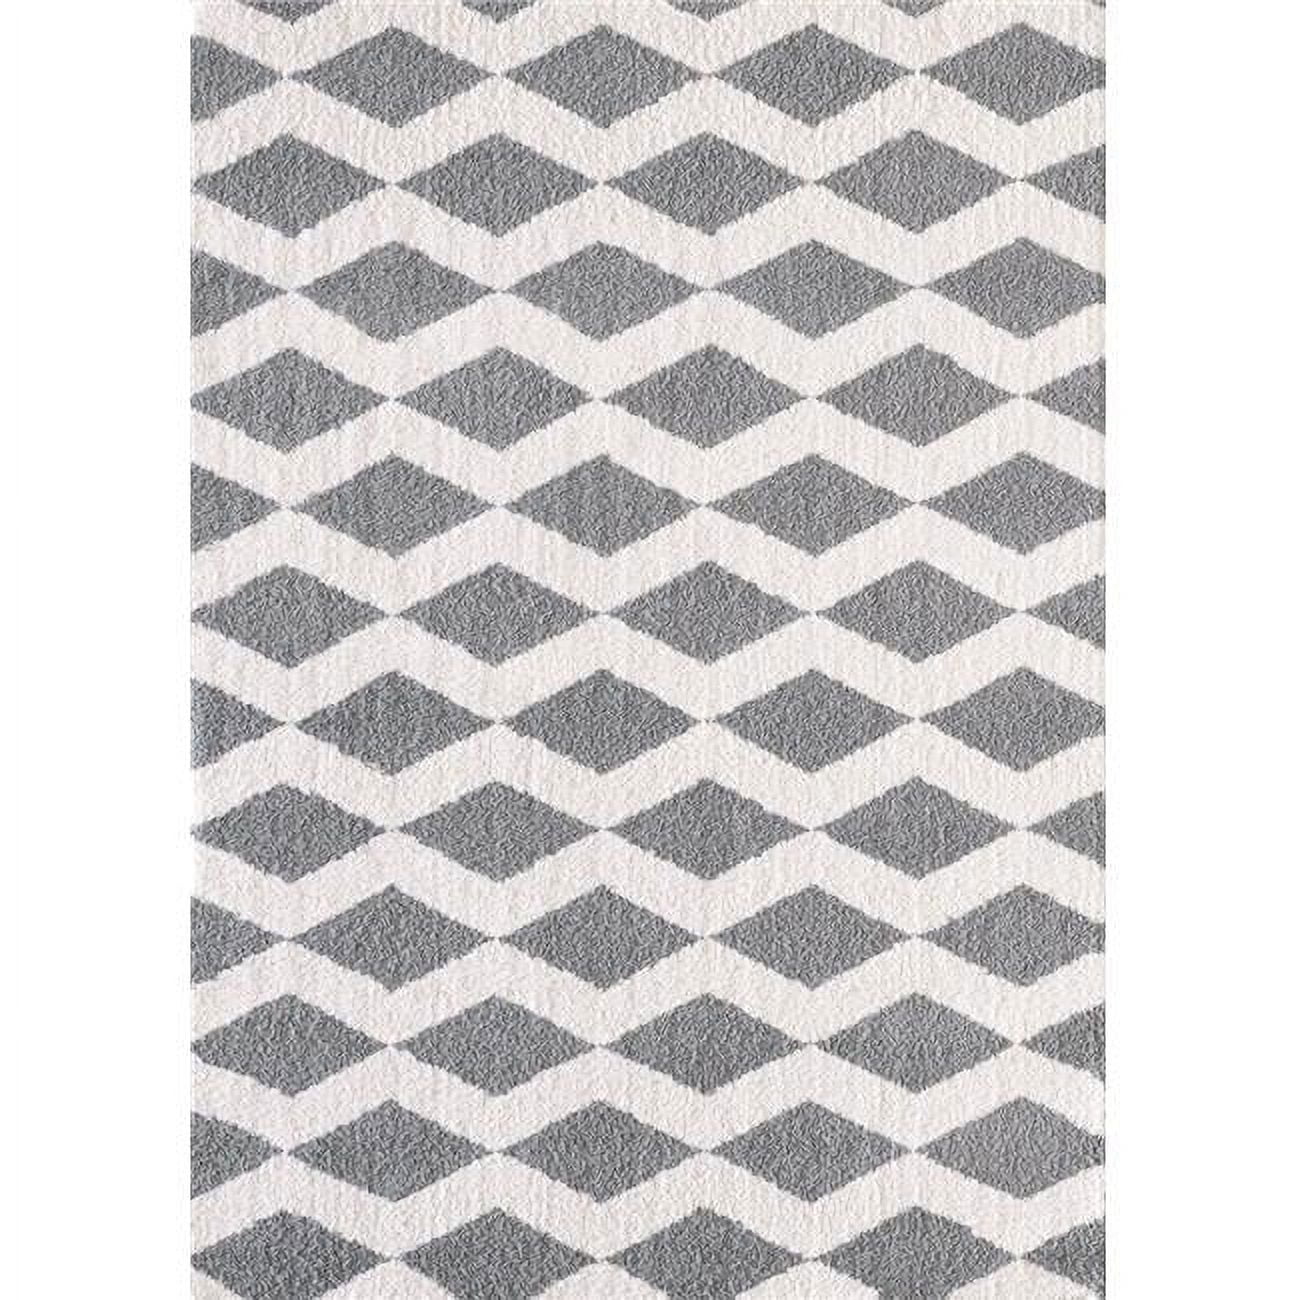 Si695904119 5 Ft. 3 In. X 7 Ft. 7 In. Silky Shag 5904 Rectangle Contemporary Rug - 119 White & Silver